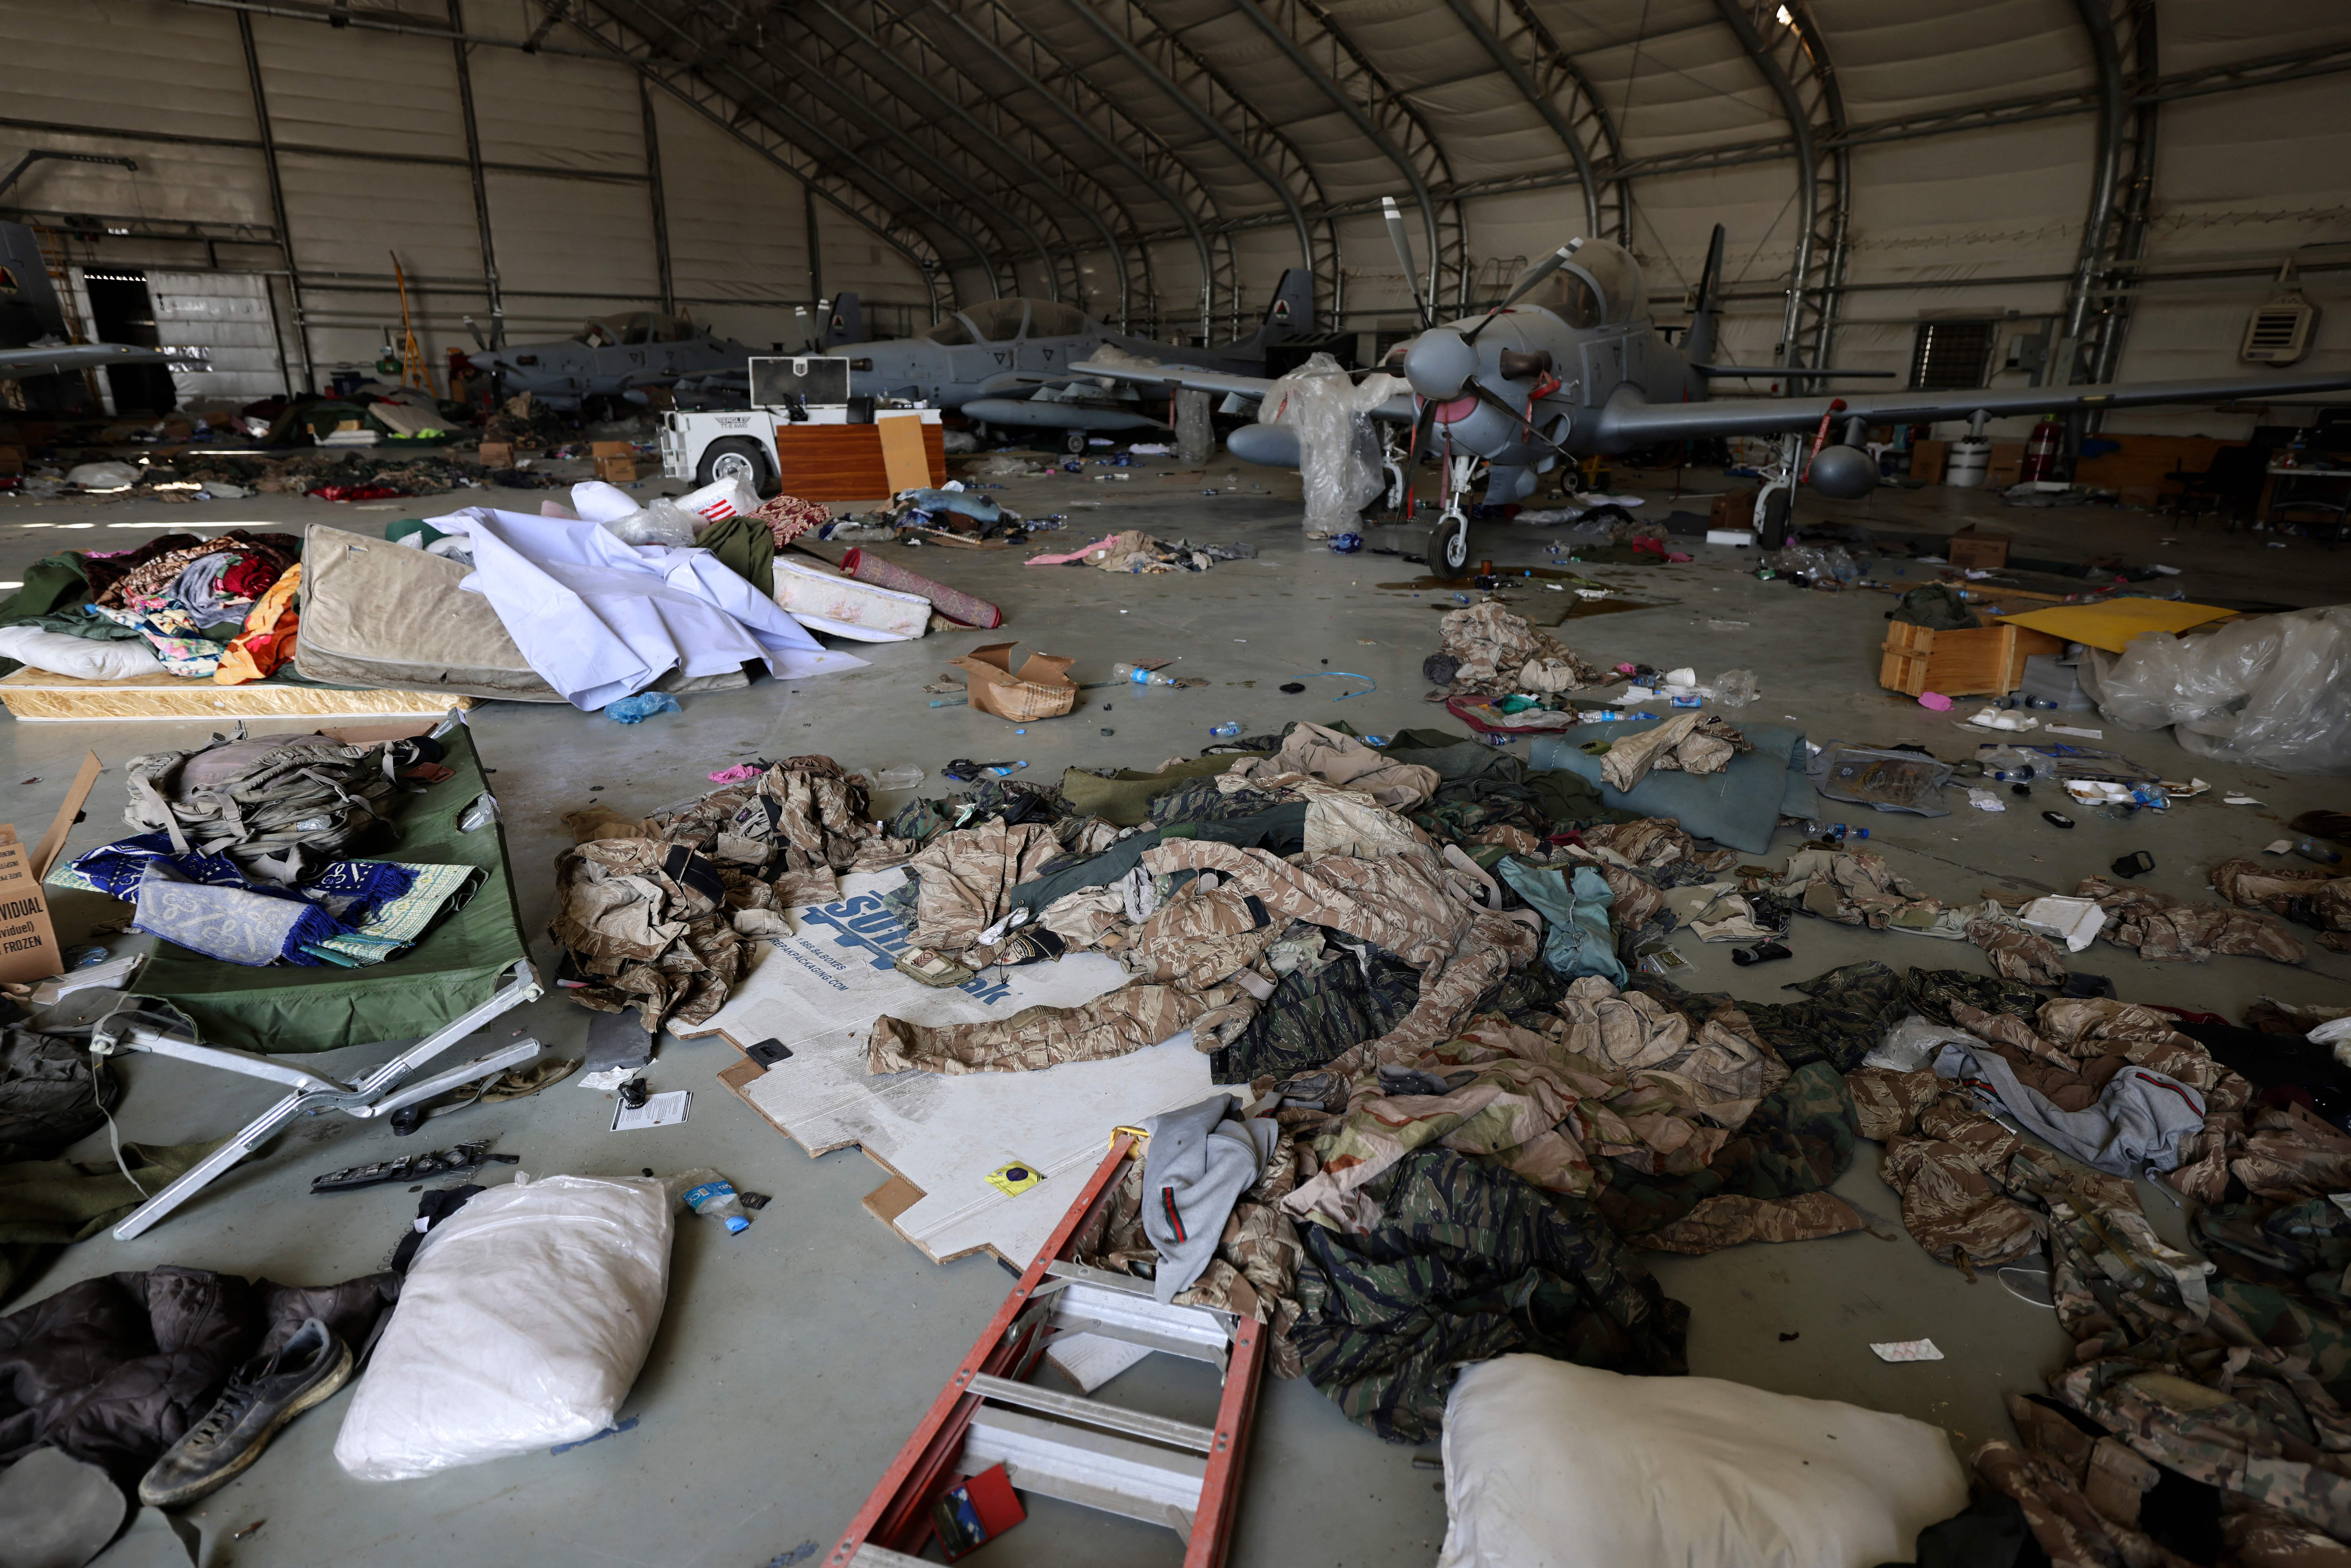 Army clothing is seen scattered next to Afghan Air Force aircrafts inside a hangar at the airport in Kabul on September 14, 2021. (Photo by Karim SAHIB / AFP) (Photo by KARIM SAHIB/AFP via Getty Images)